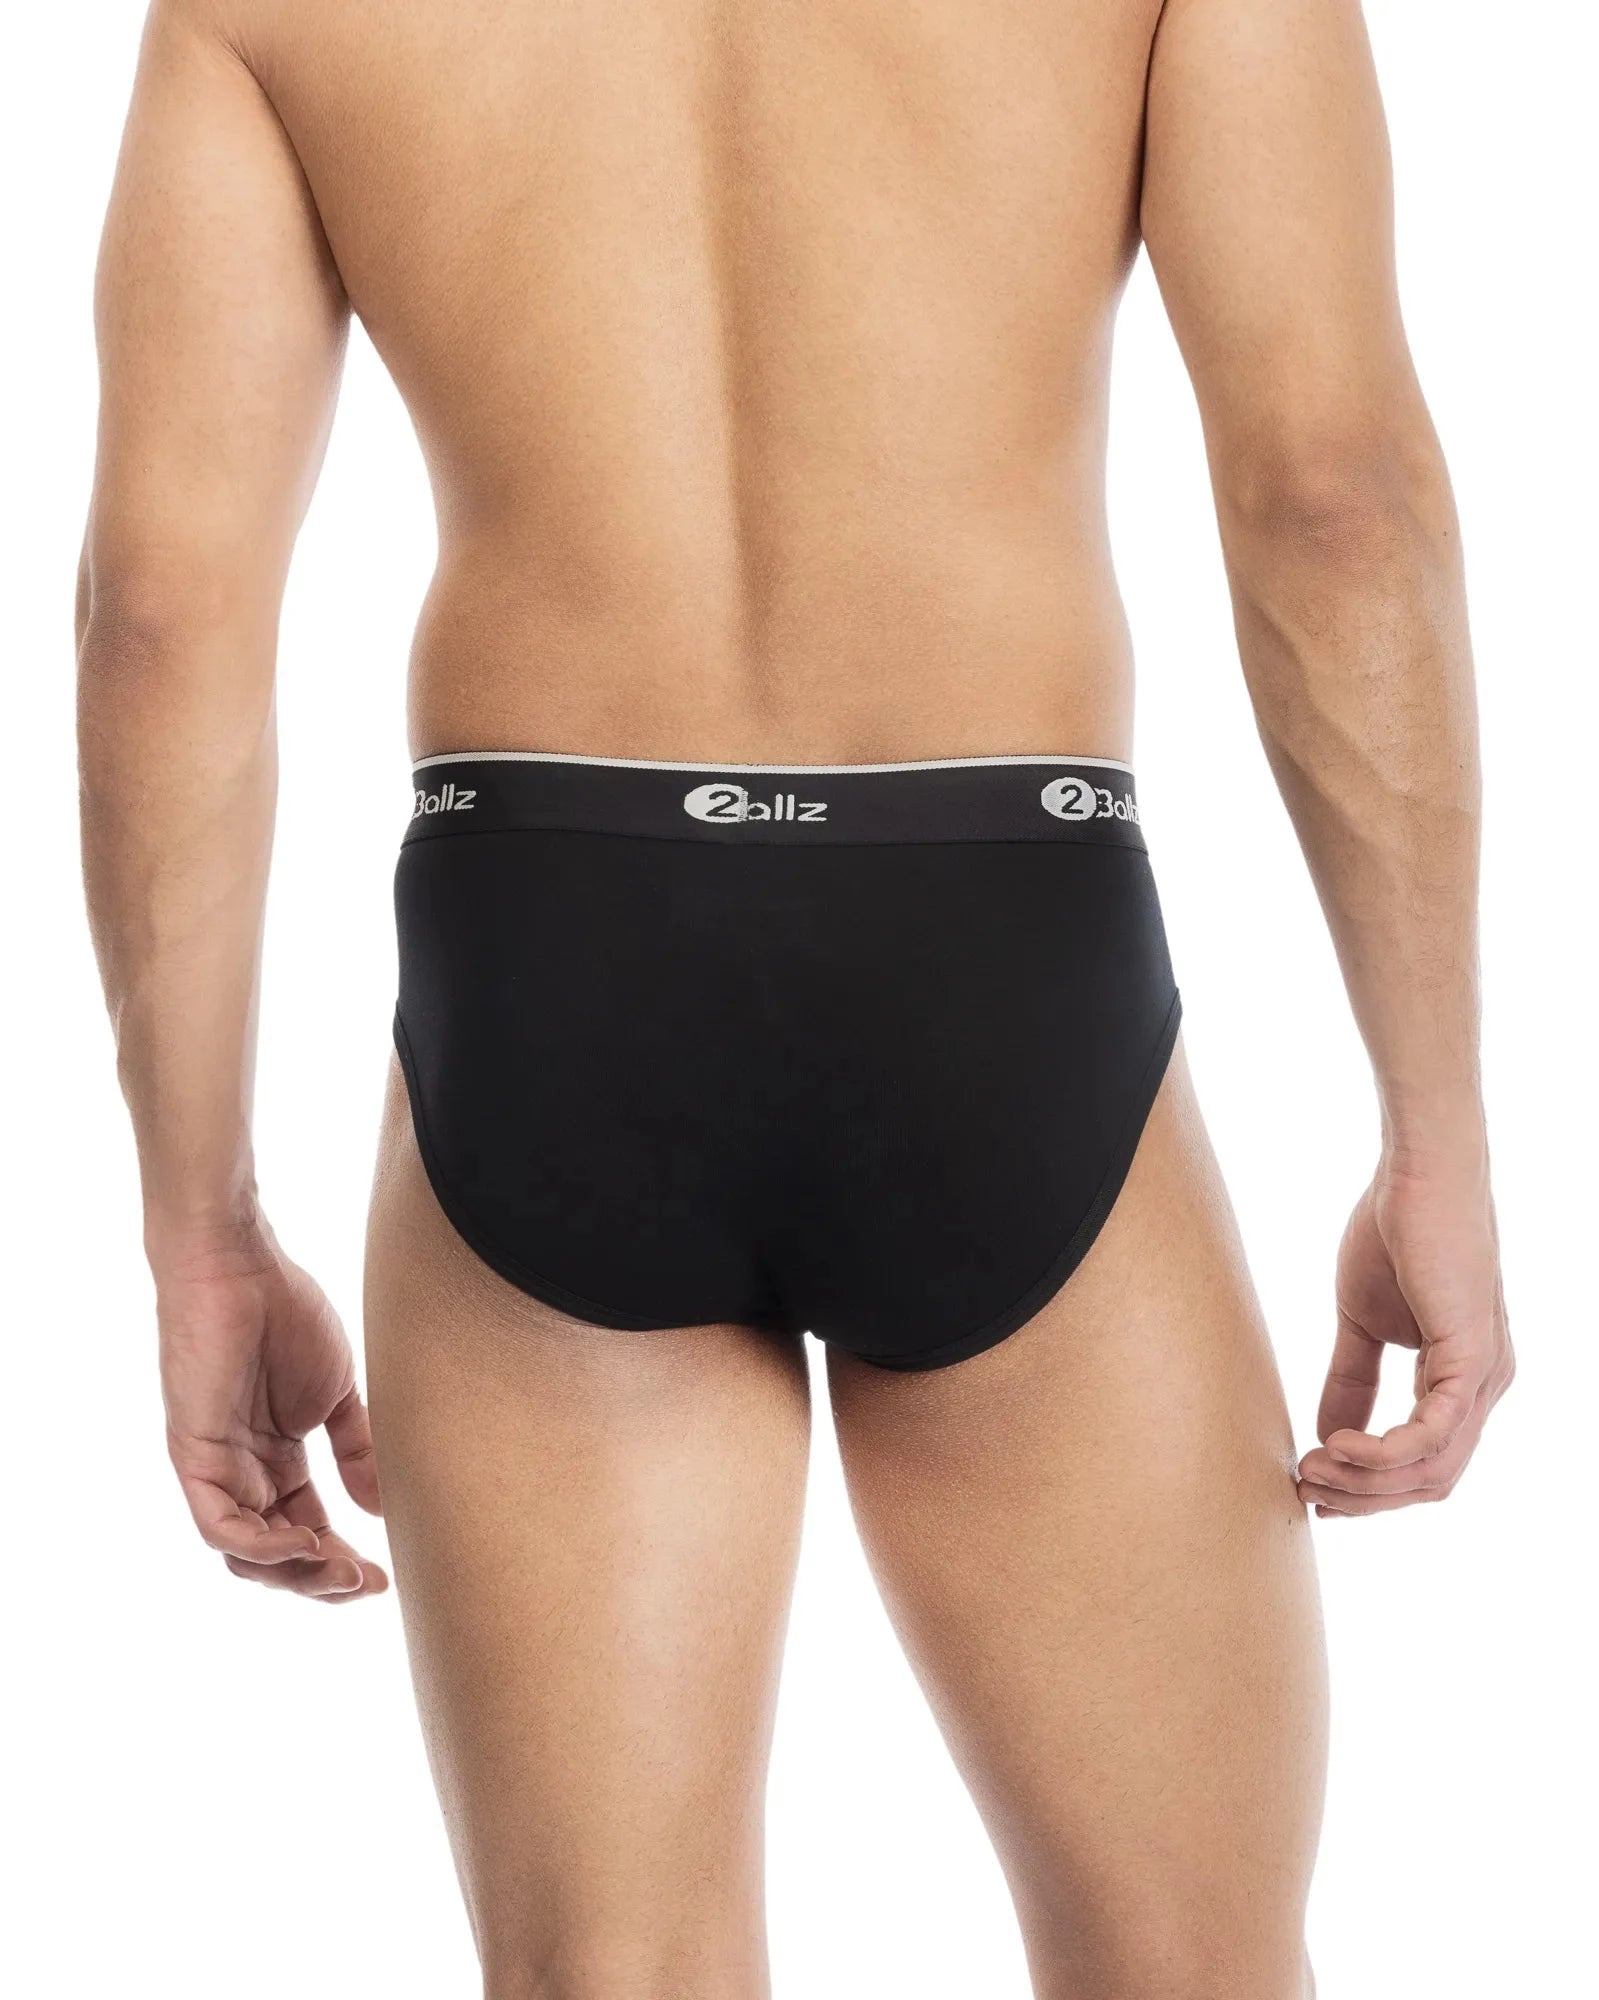 2Ballz Brief with Built-in Pouch (Pack of 3) - 2Ballz Clothing